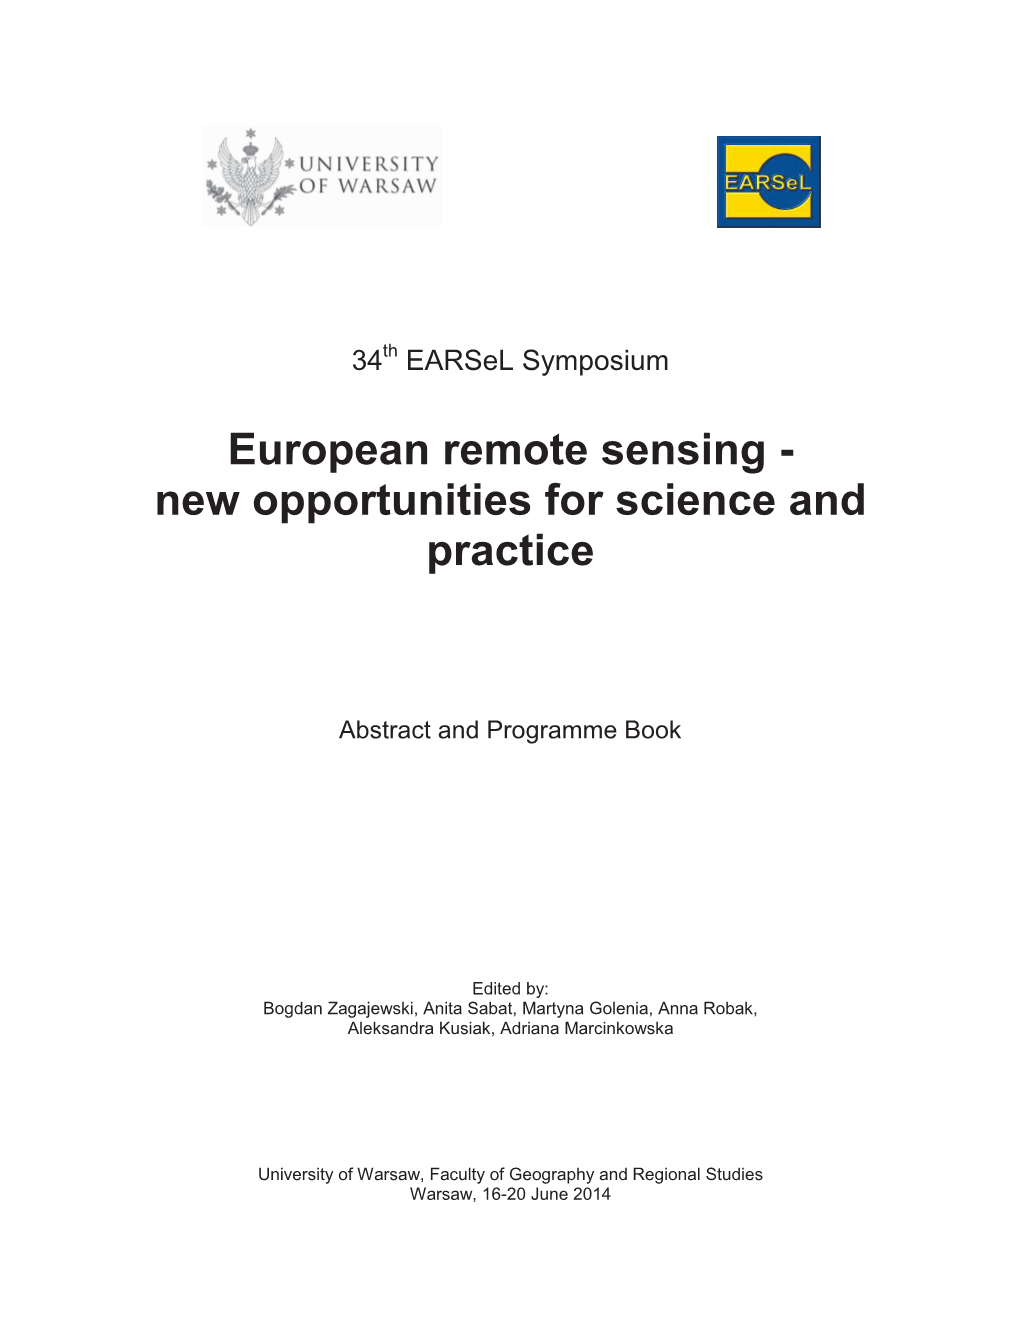 European Remote Sensing - New Opportunities for Science and Practice